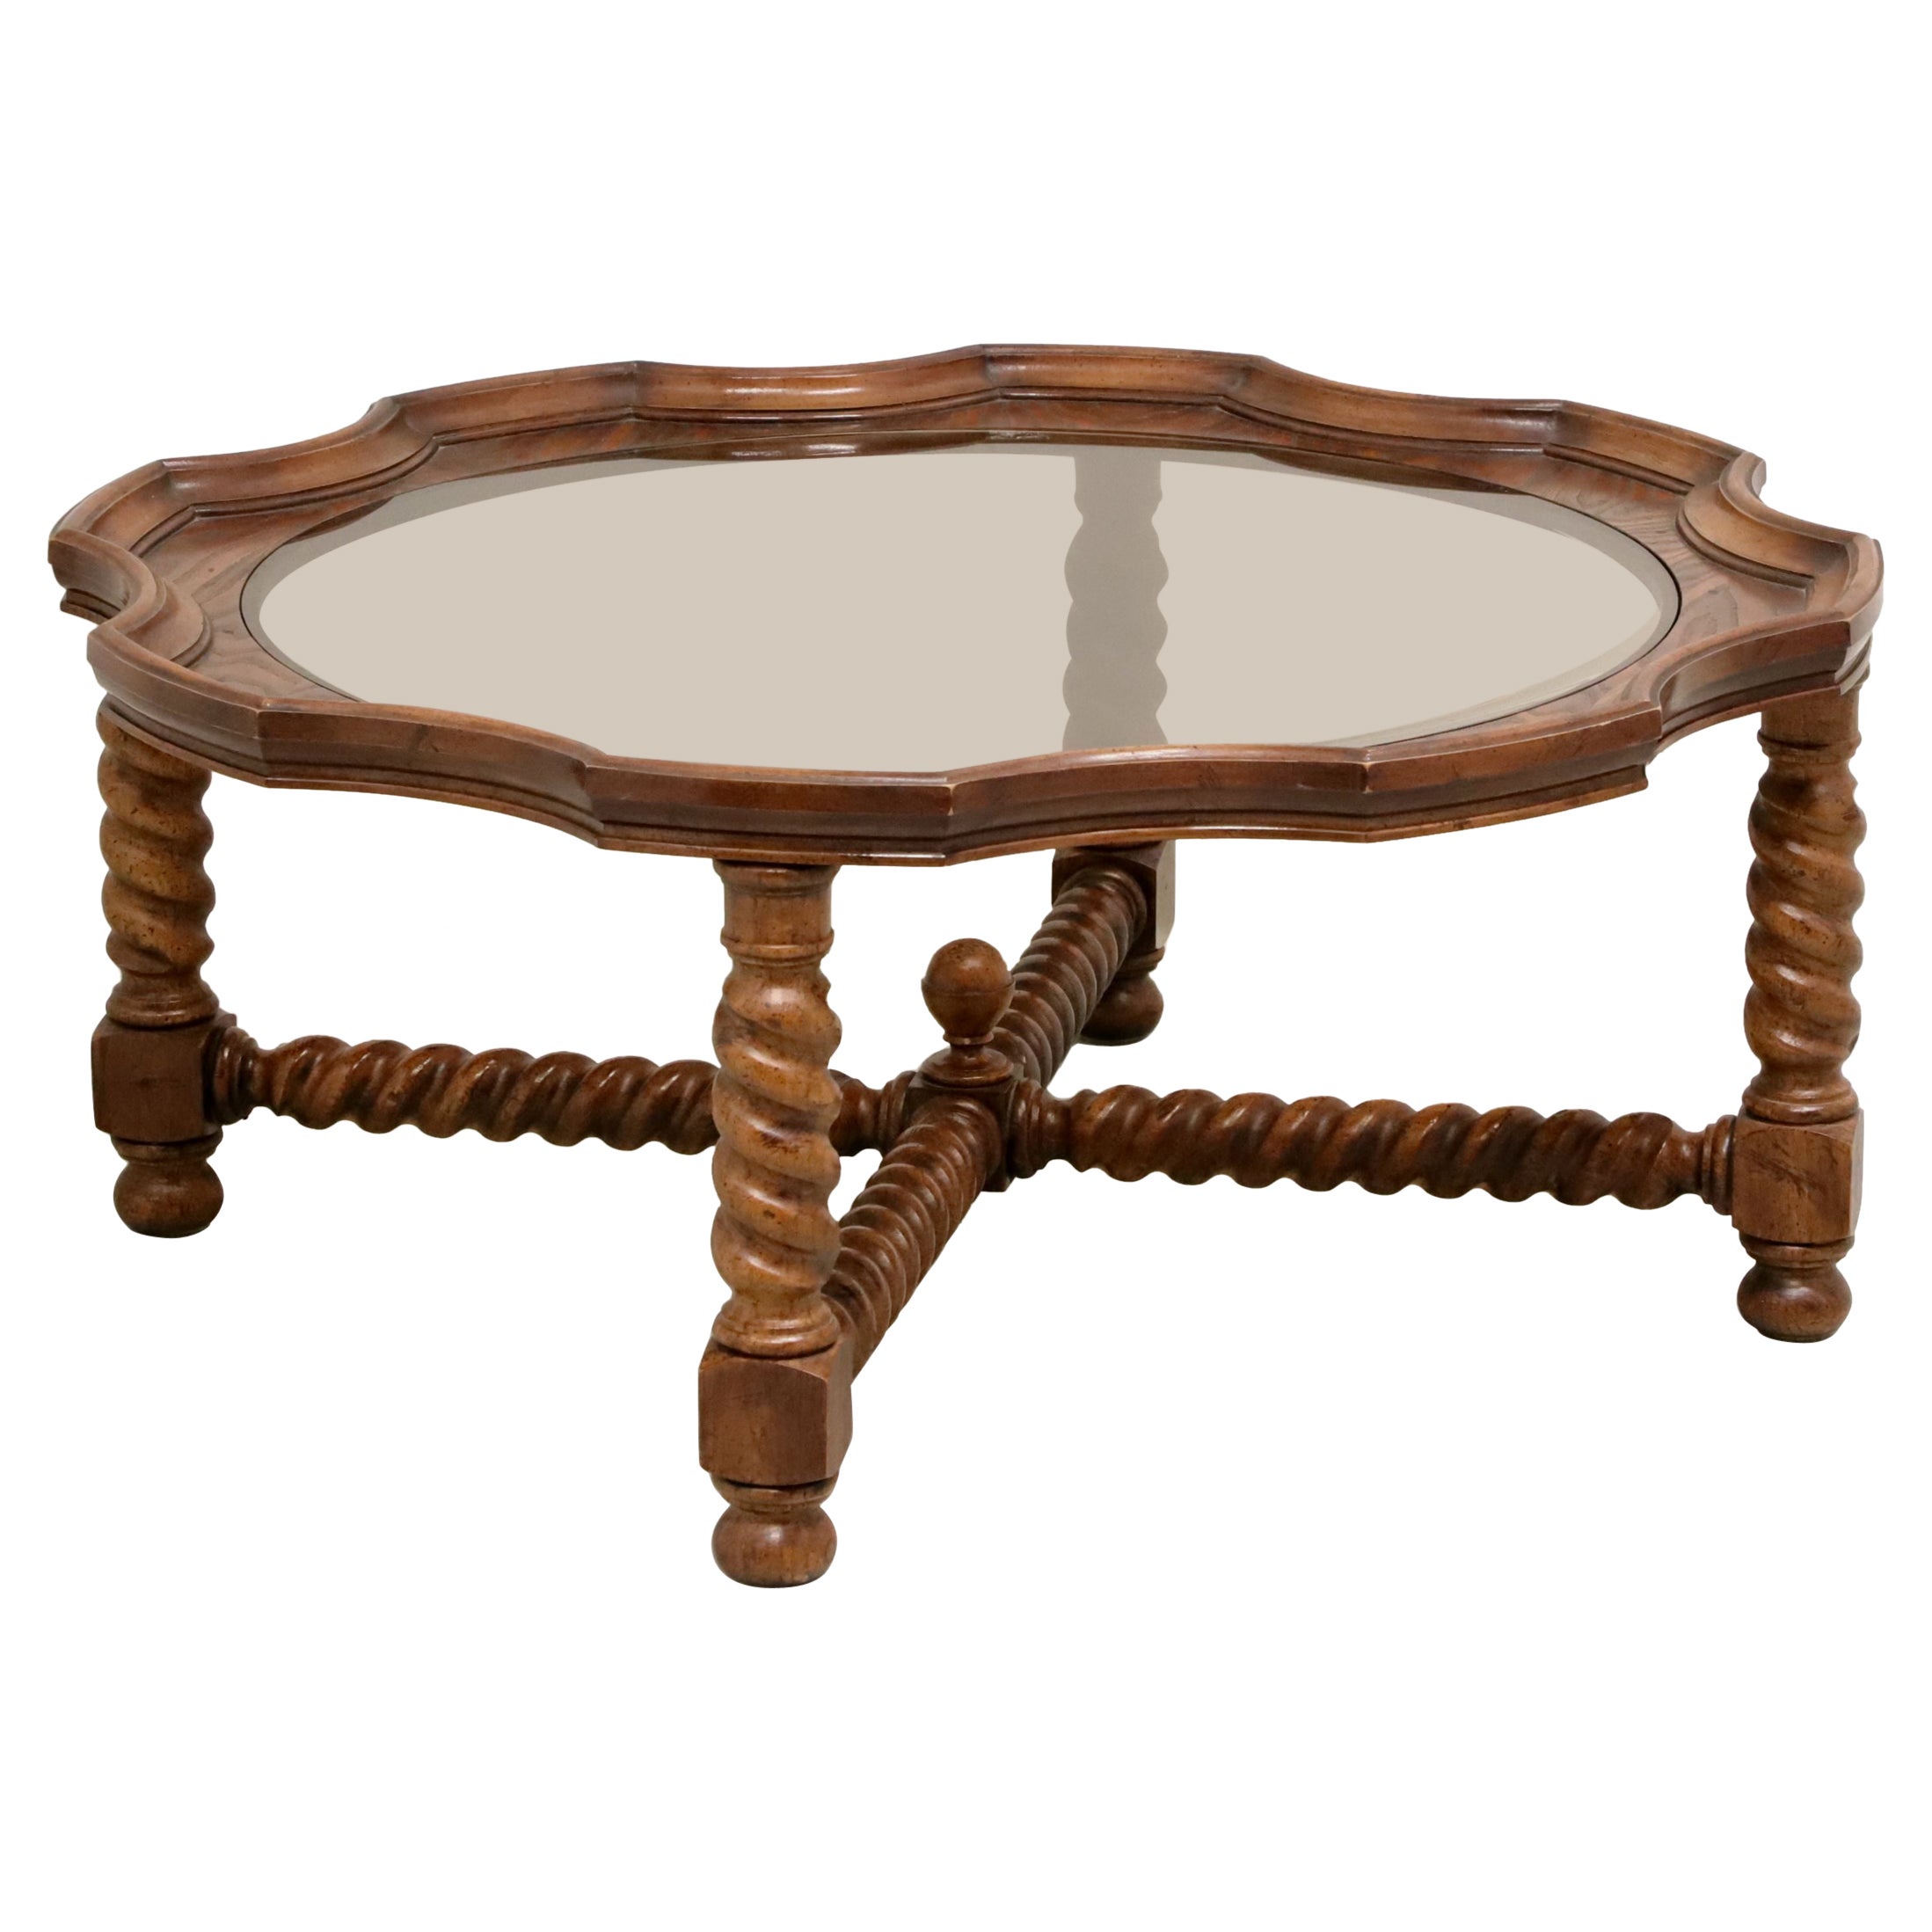 Late 20th Century Oak Barley Twist Jacobean Round Glass Top Coffee Table For Sale